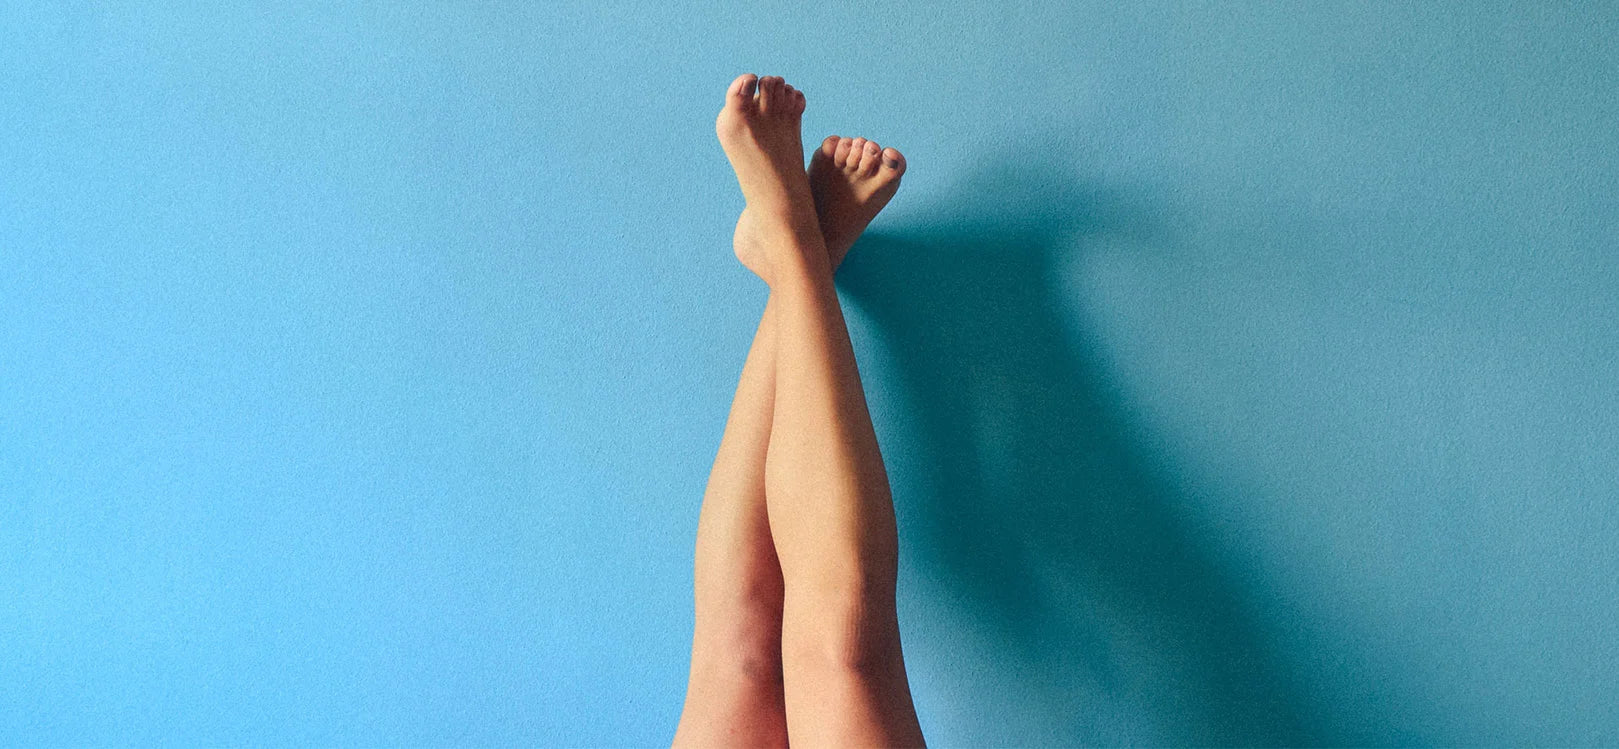 Two legs crossed and raised up against a blue wall